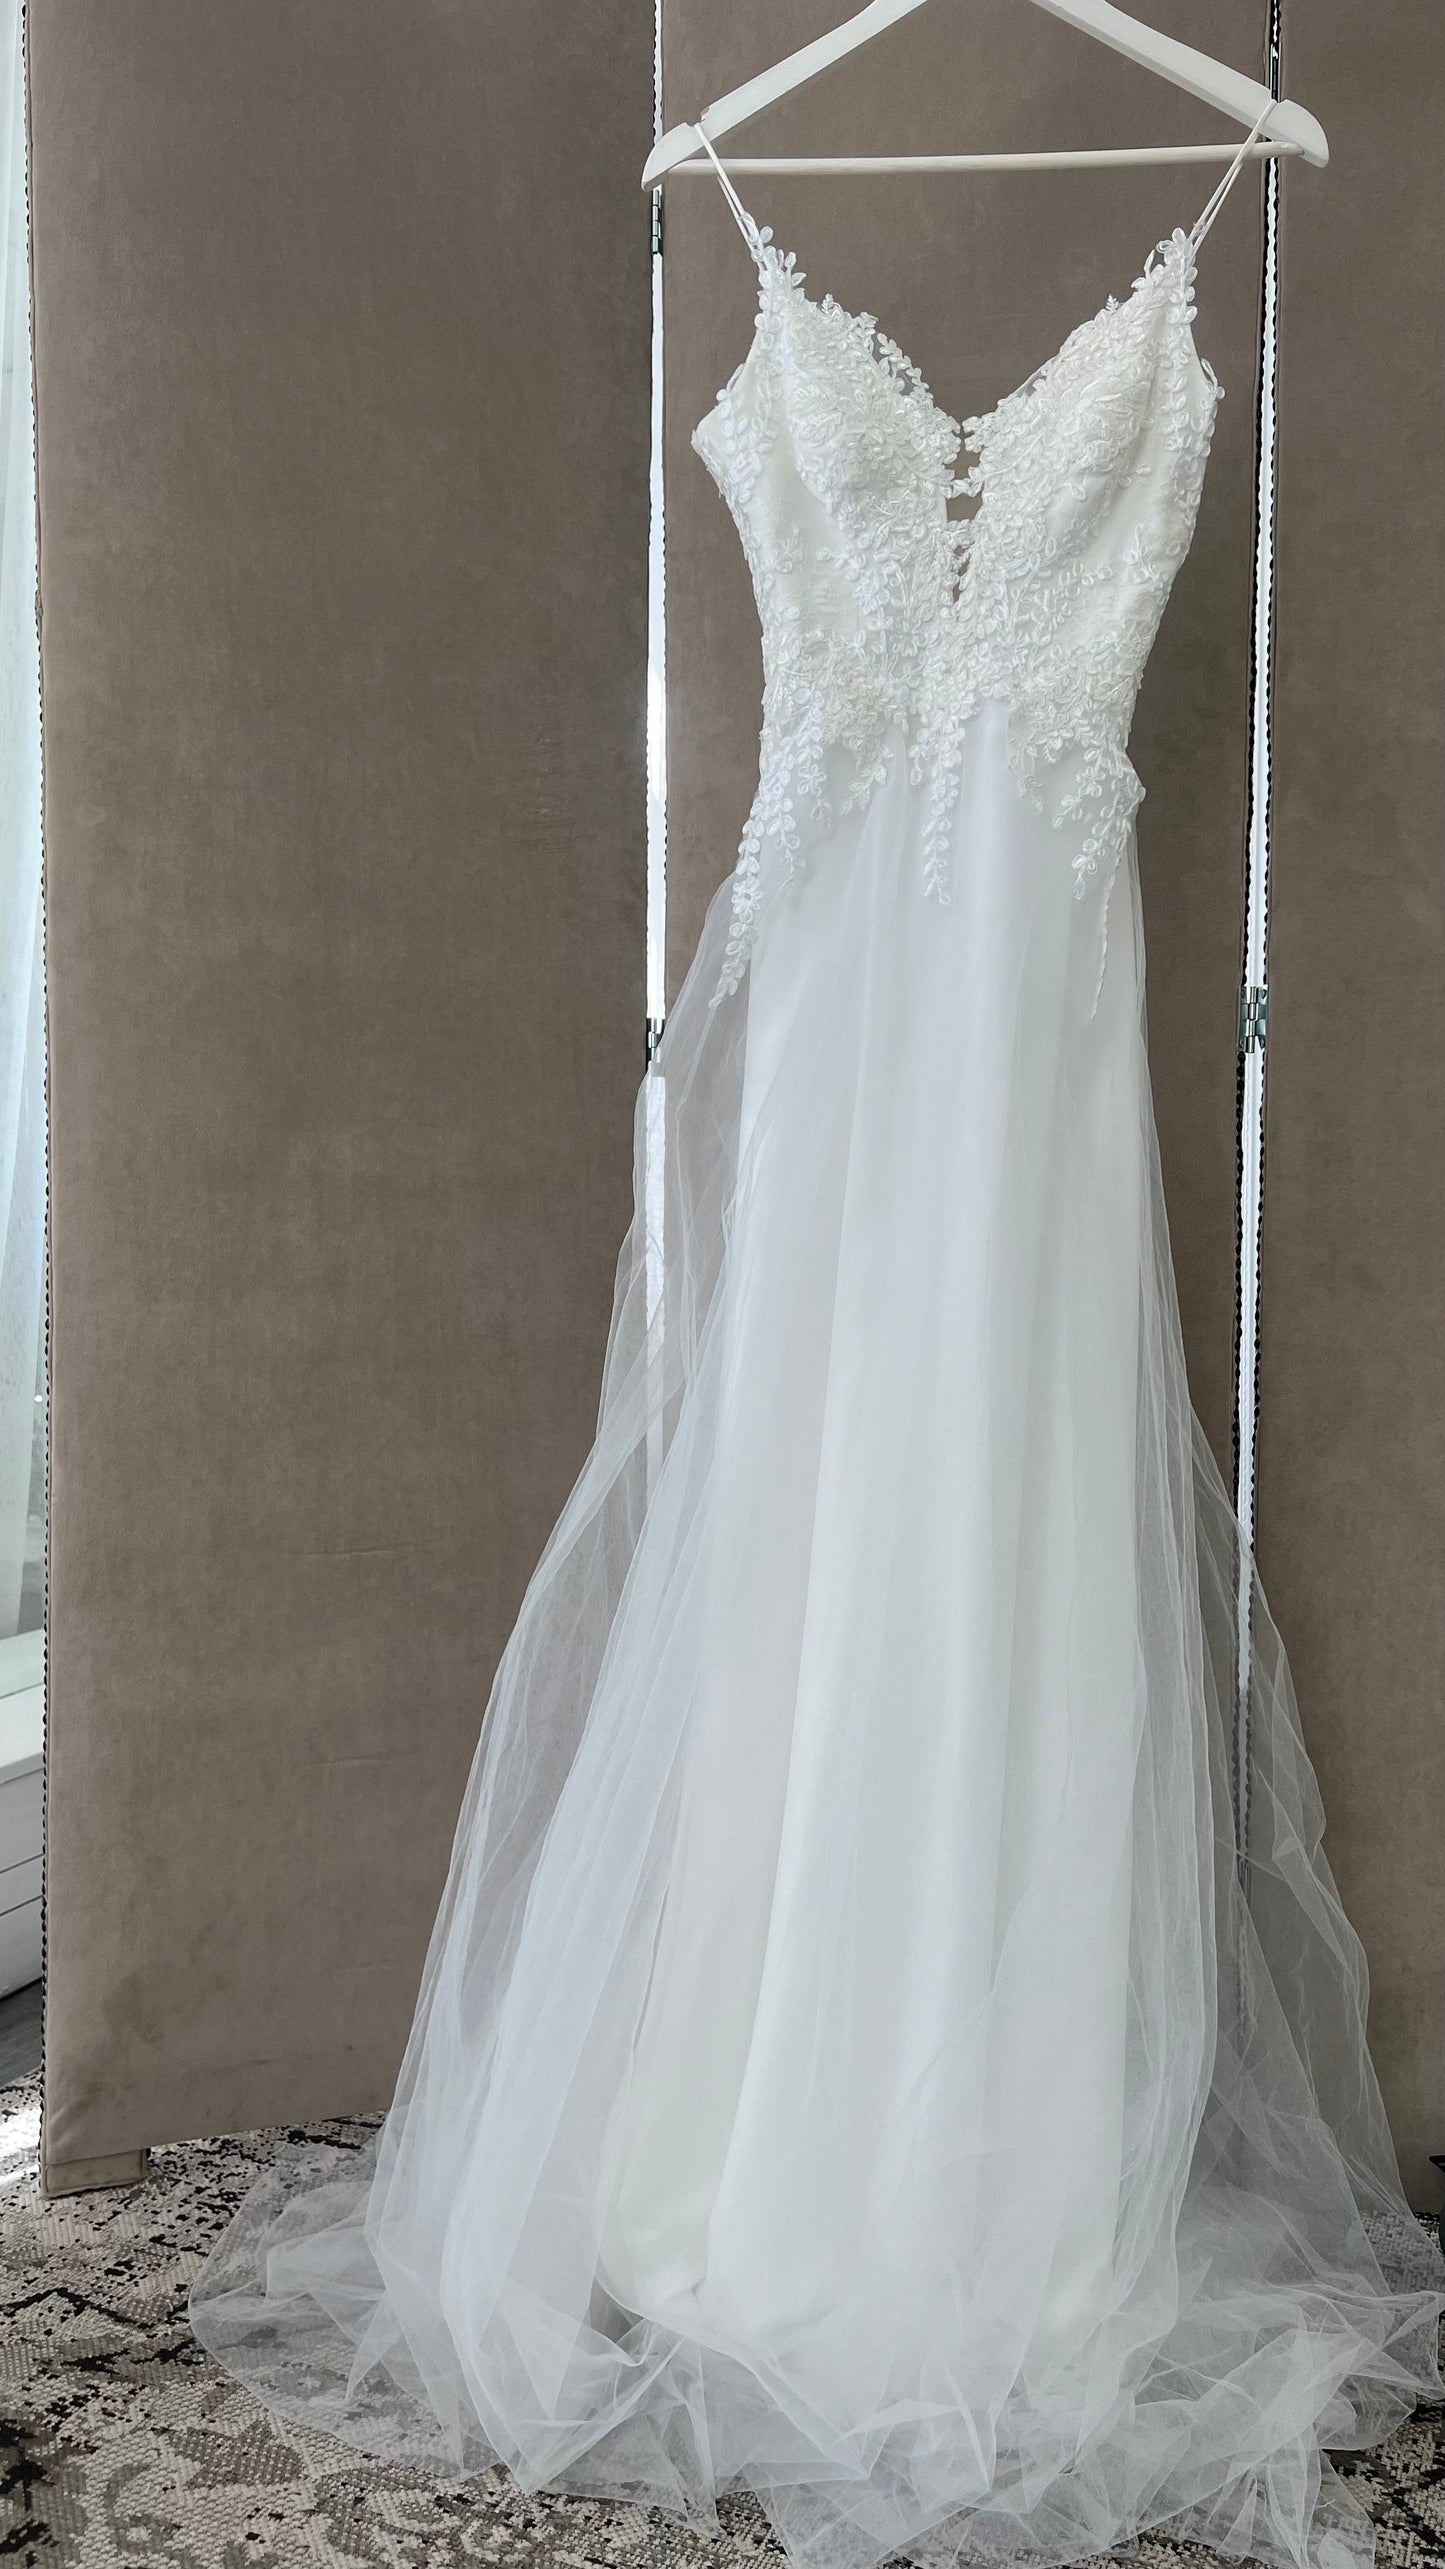 Code 2145: White tulle with handsewn lace, Size 6/8